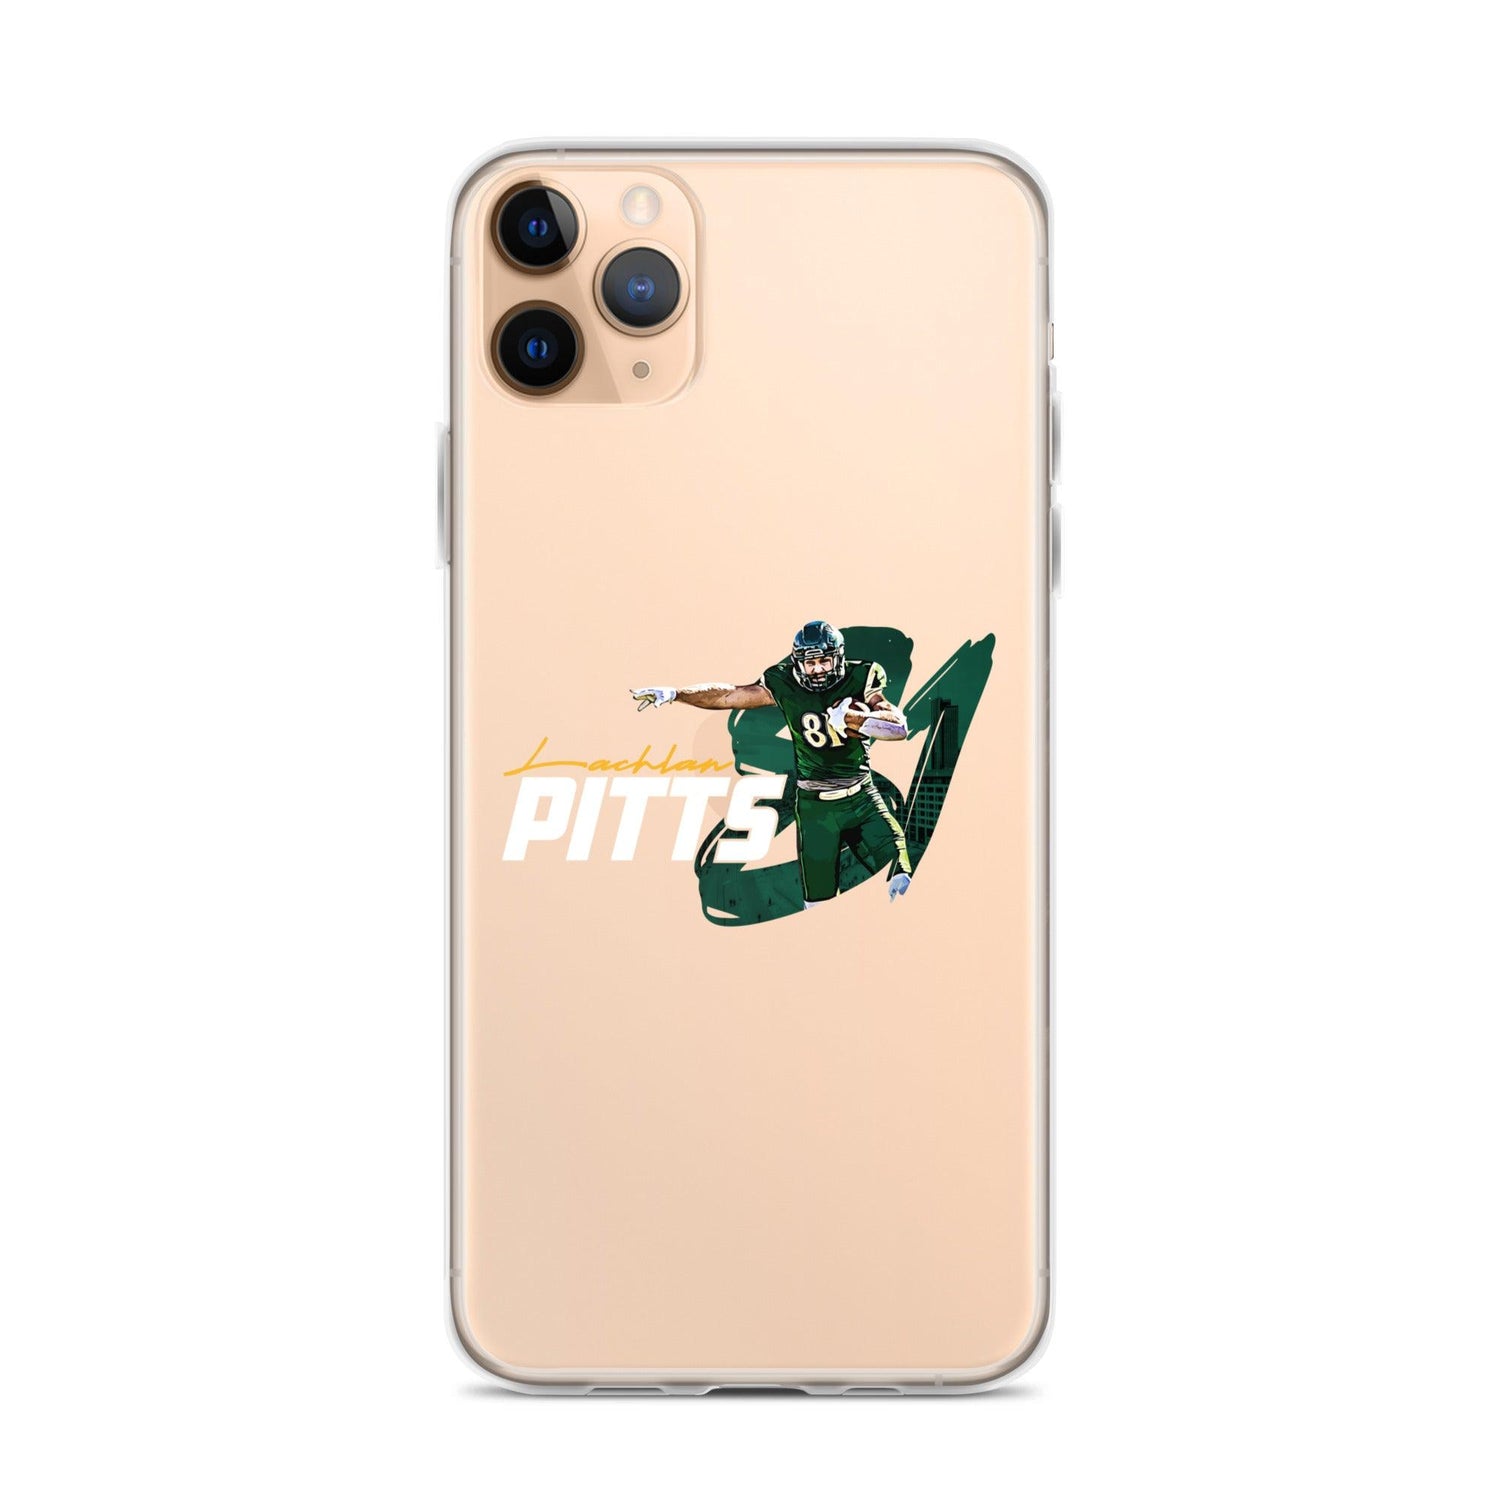 Lachlan Pitts "Gameday" iPhone Case - Fan Arch